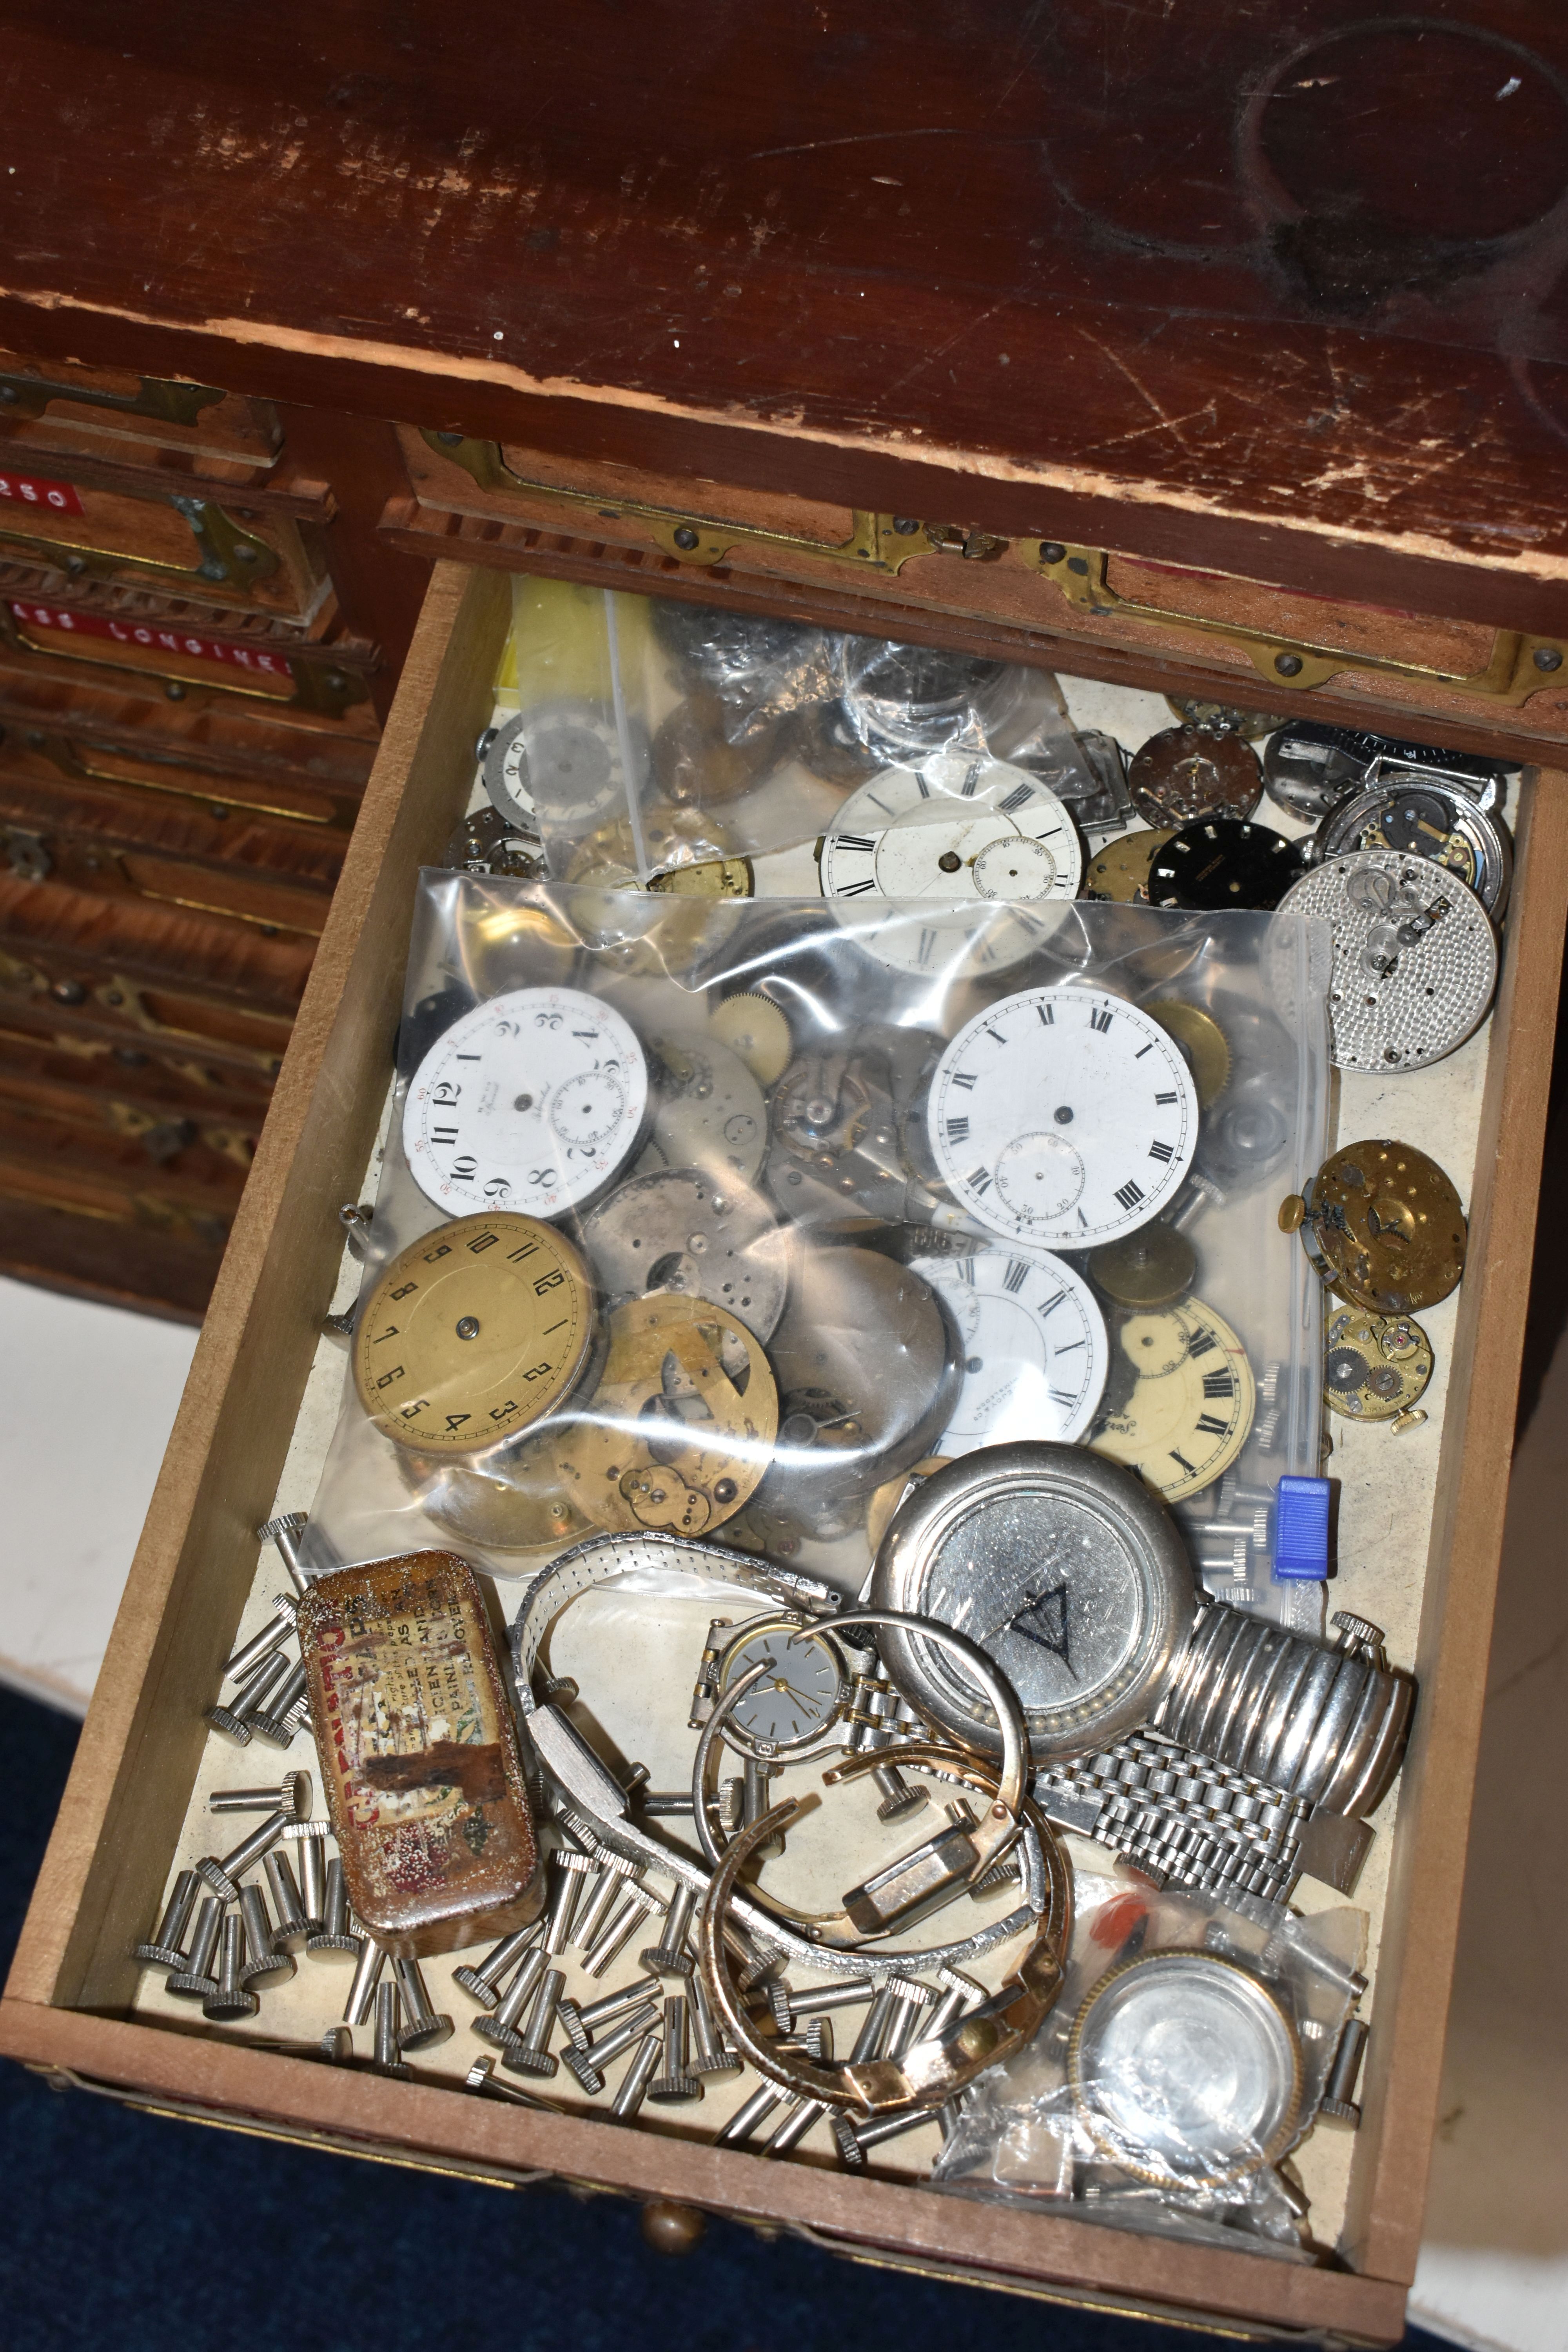 A LARGE WOODEN MULTI STORAGE WATCH MAKERS SET OF DRAWS, measuring approximately height 45cm x - Image 14 of 21